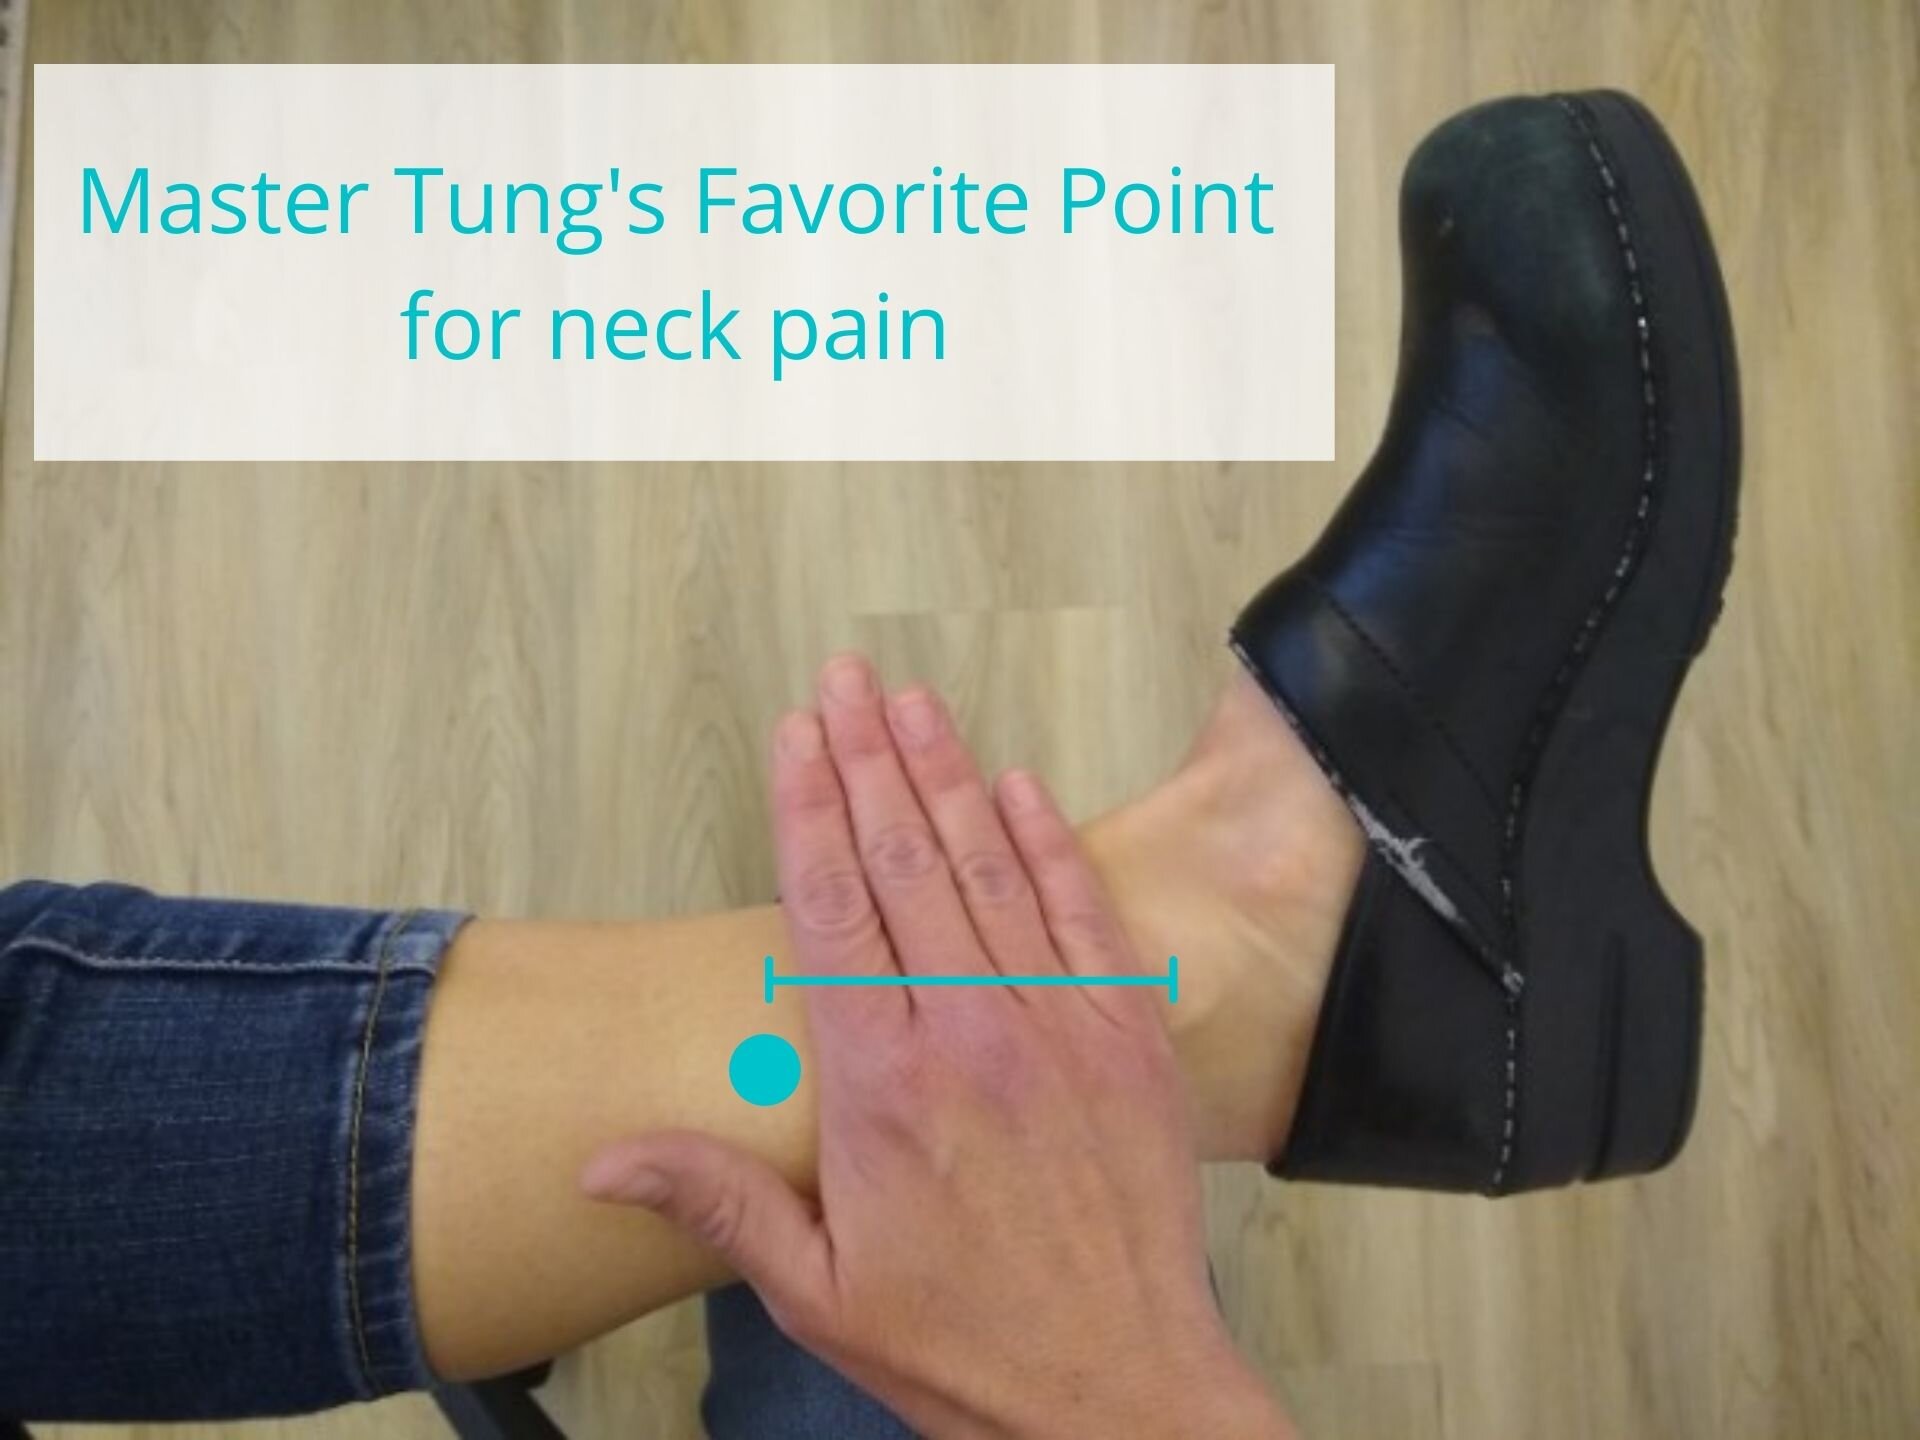 Blog  Use Acupressure to Relieve Neck Pain